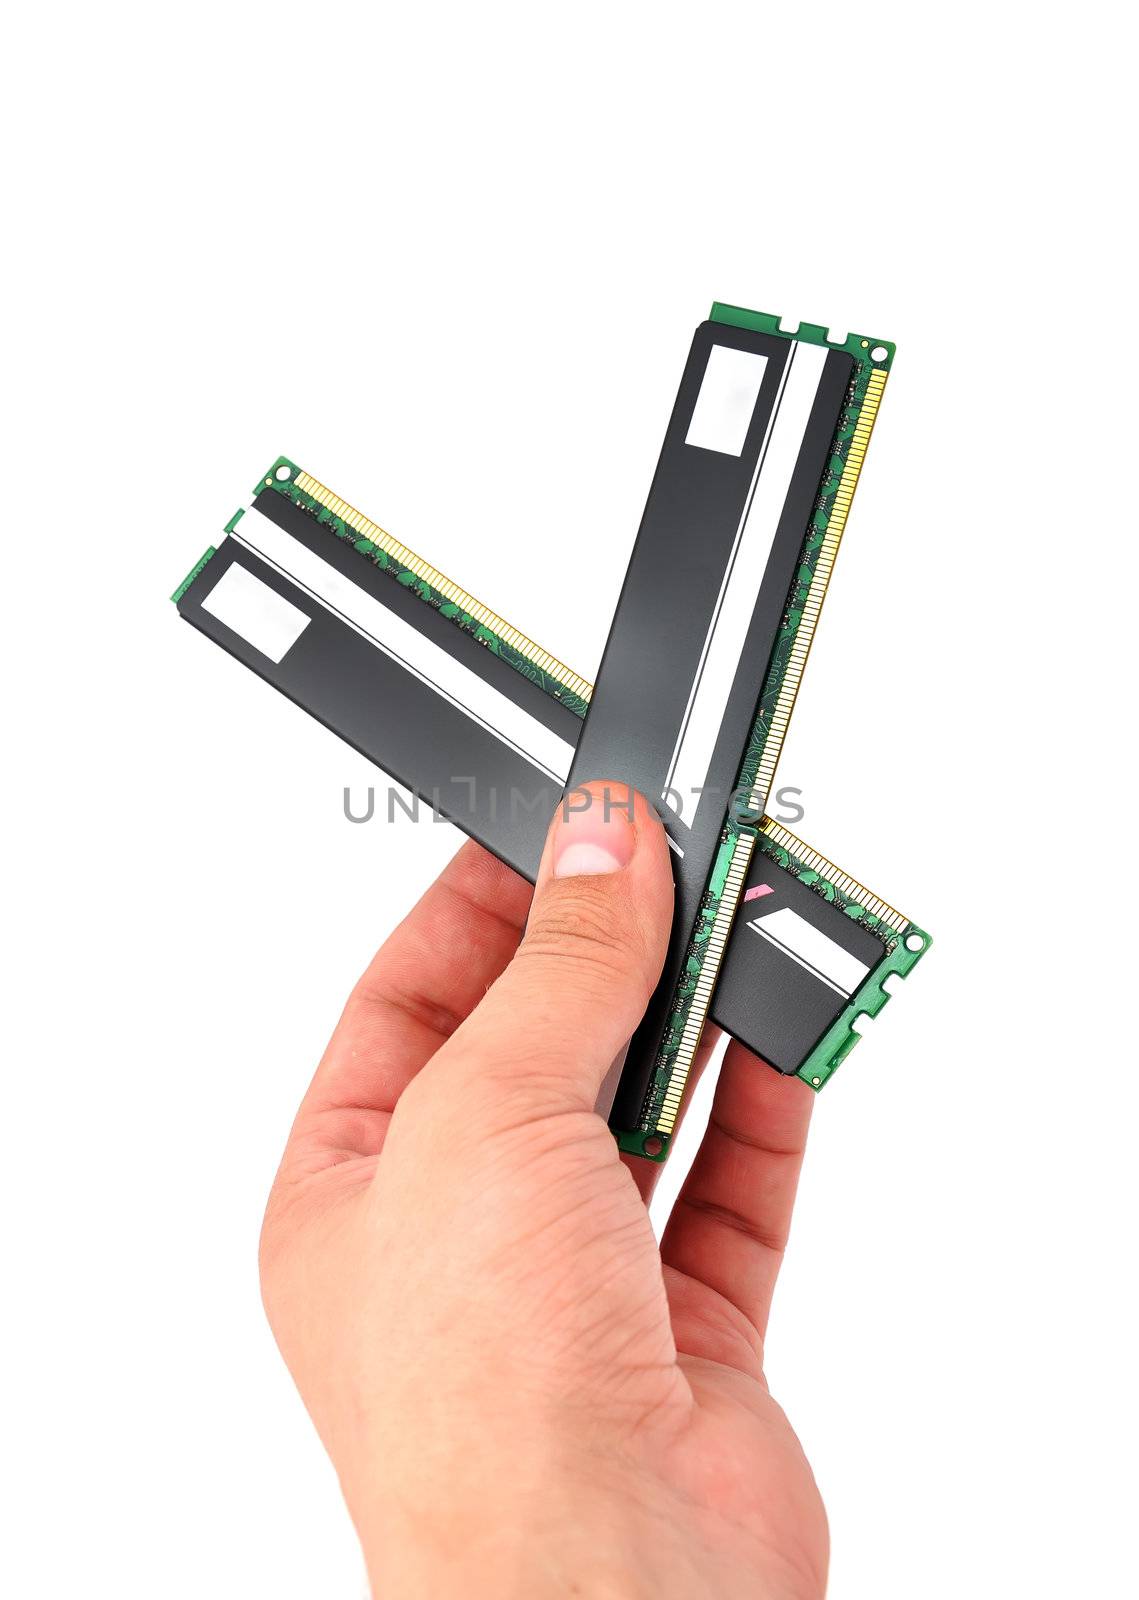 two RAM in hand  on white background